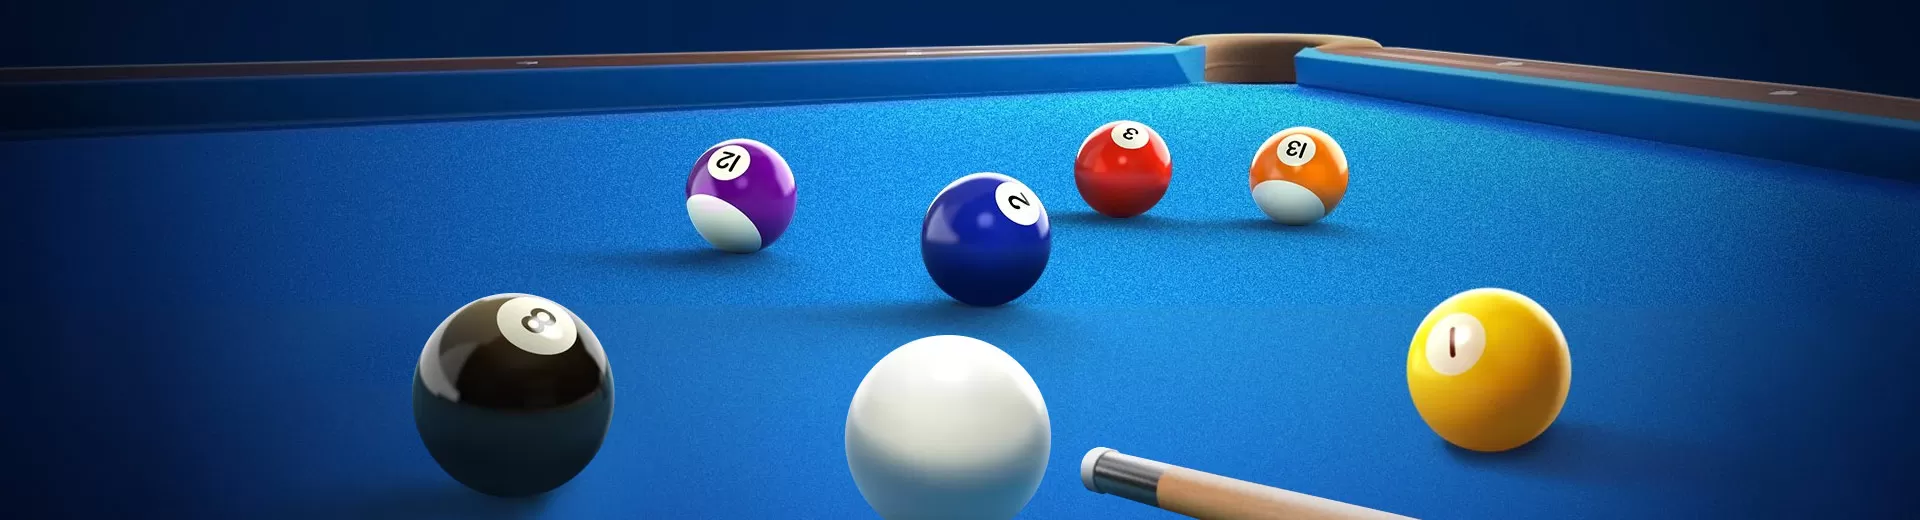 🎮 How to PLAY [ 8 Ball Pool ] on PC ▷ DOWNLOAD and INSTALL 